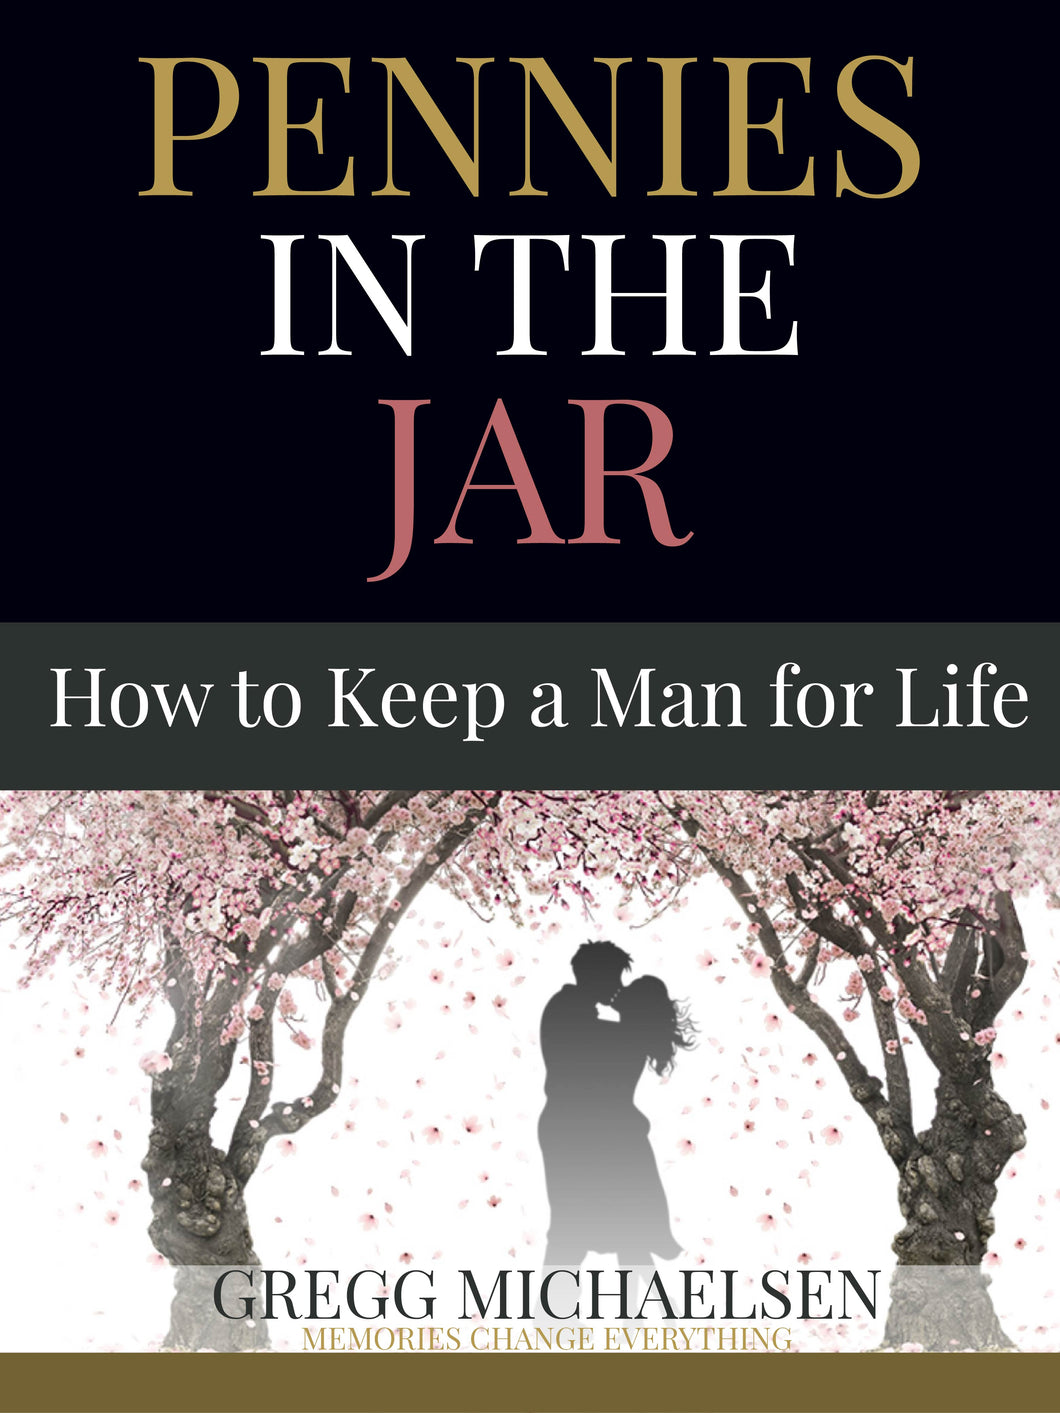 Pennies in the Jar: How to Keep a Man for Life